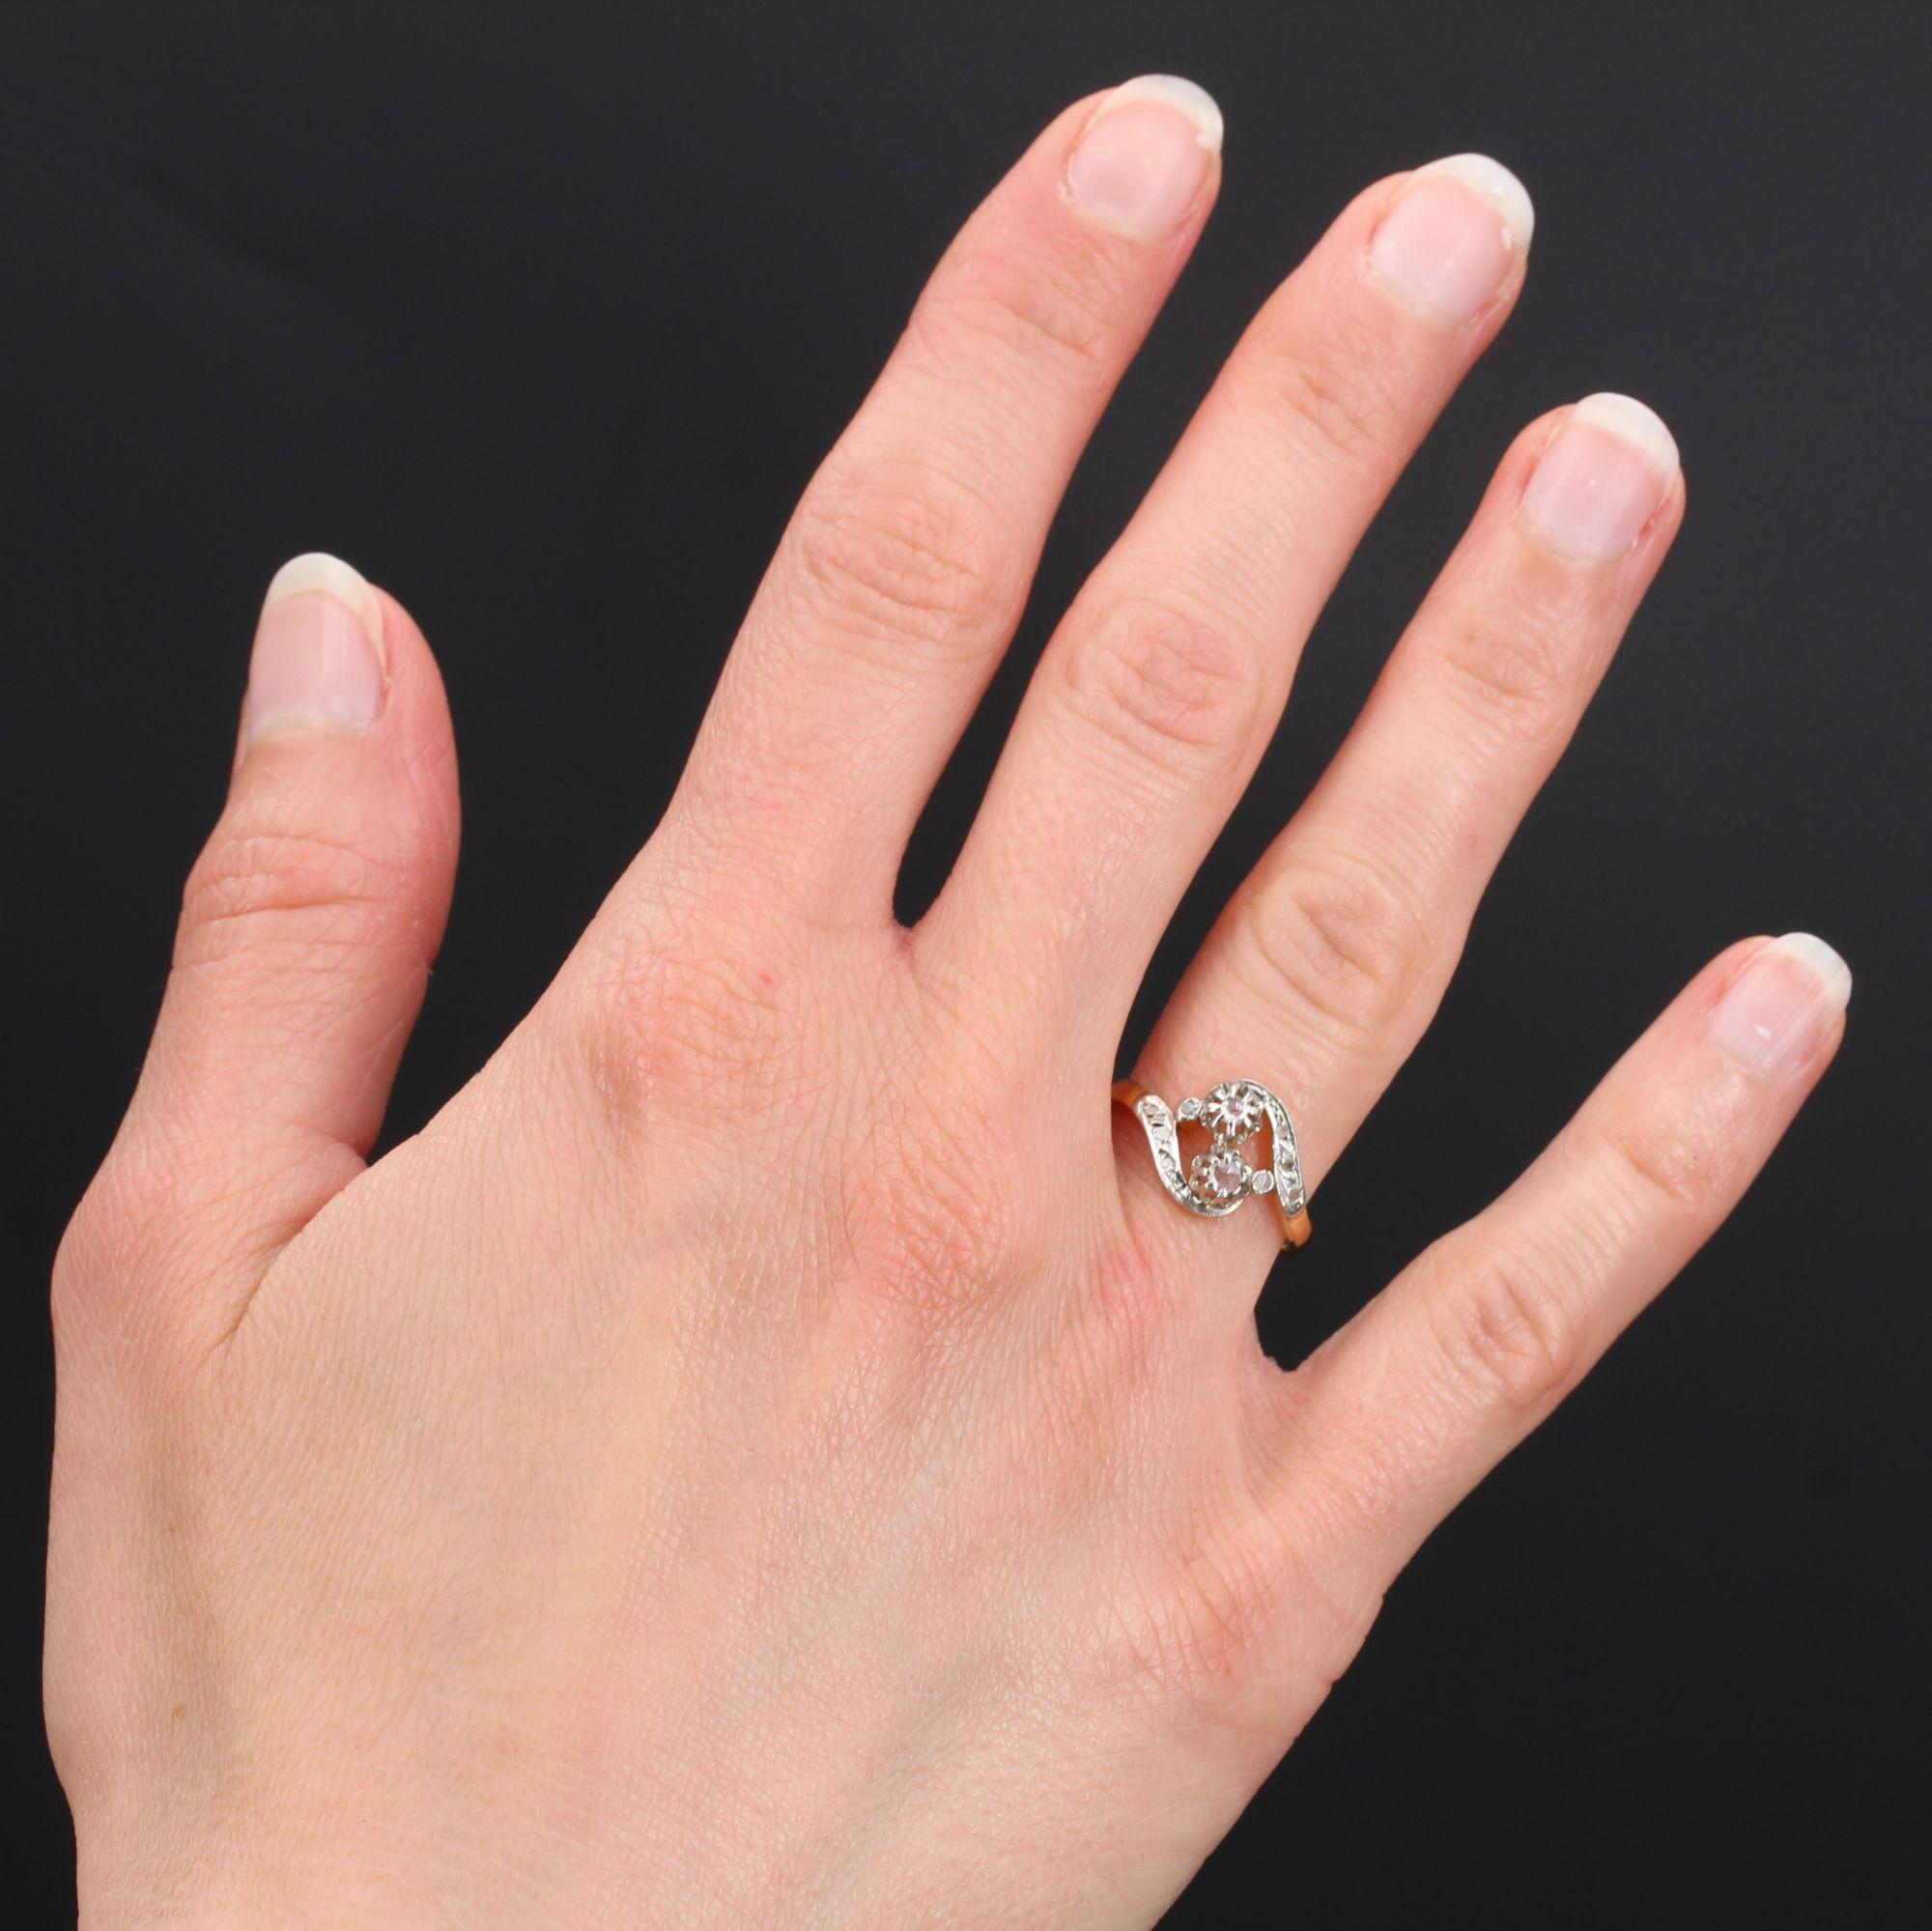 Ring in 18 karat yellow gold, and platinum.
Charming antique ring, it is constituted of a motive called you and me, set with claws of 2 rose- cut diamonds. On either side, asymmetrically, a curve set with rose-cut diamonds gives the start of the